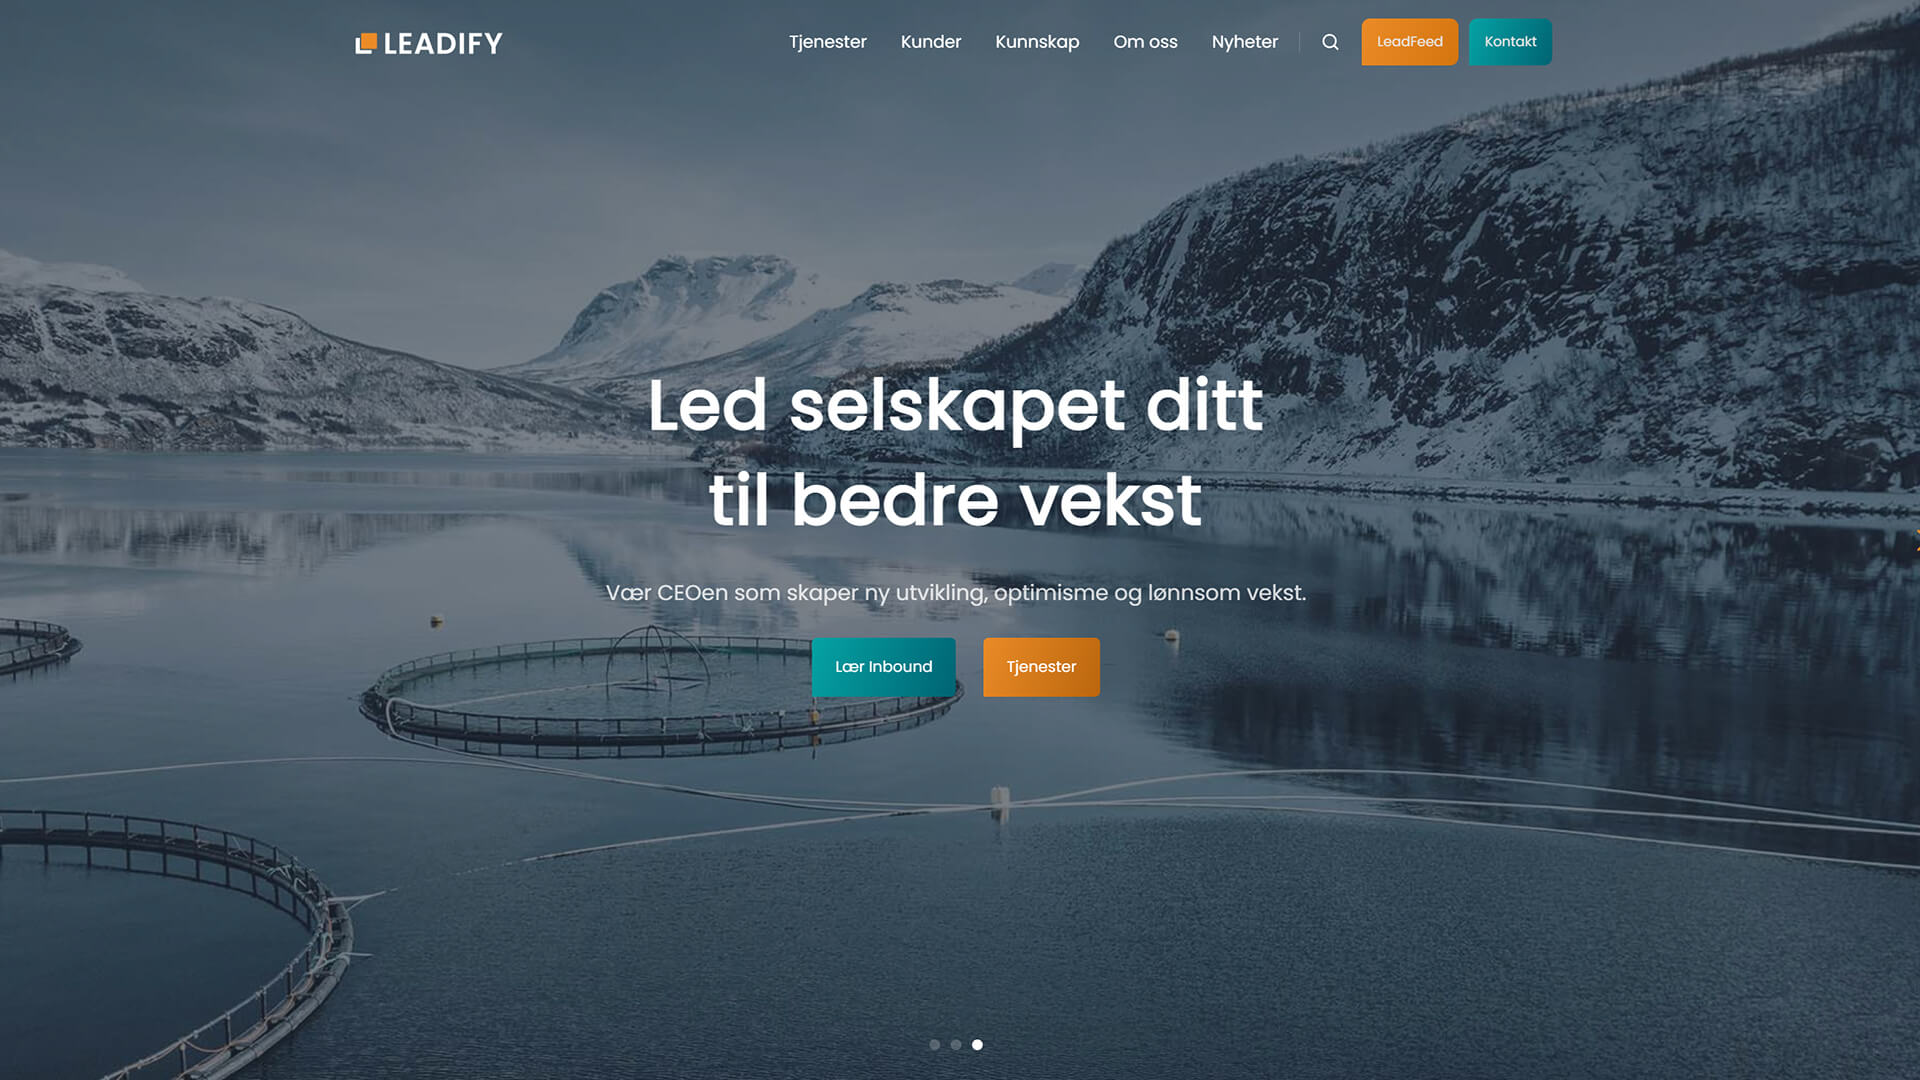 The beautiful leadify.no website created with Act3 on the HubSpot CMS